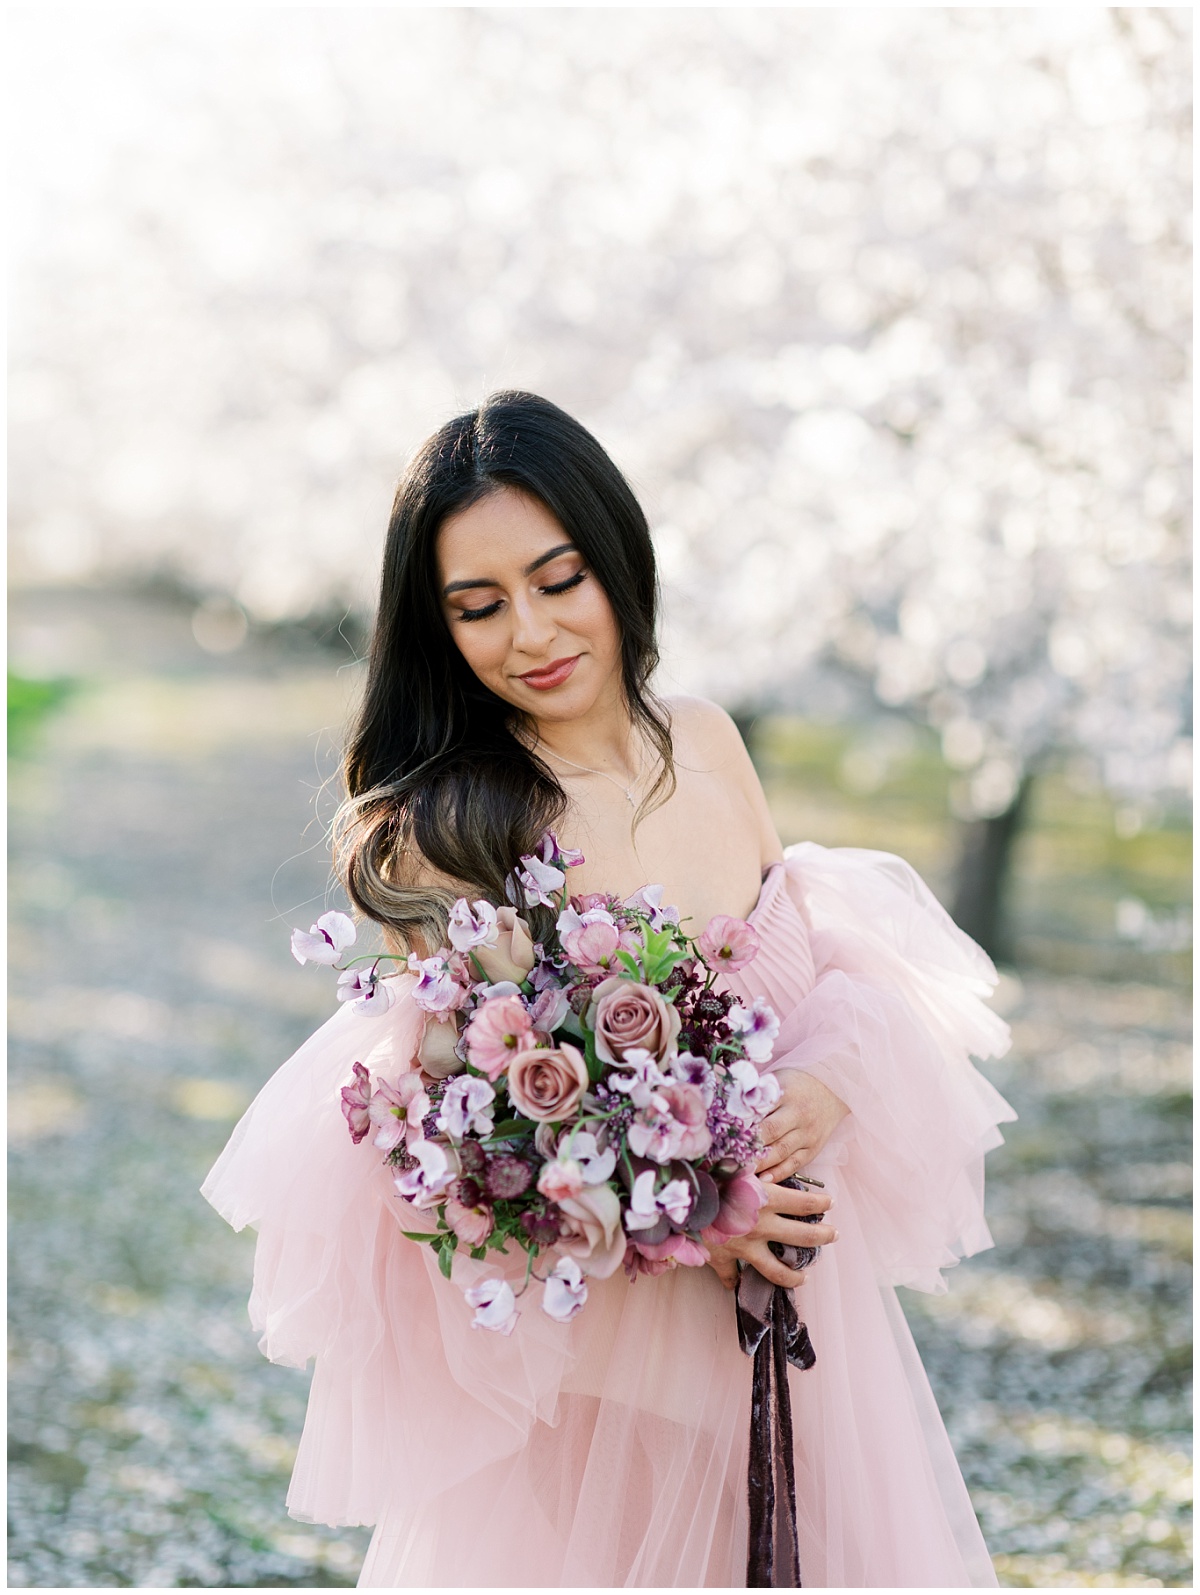 Ethereal Almond Orchard Sessions